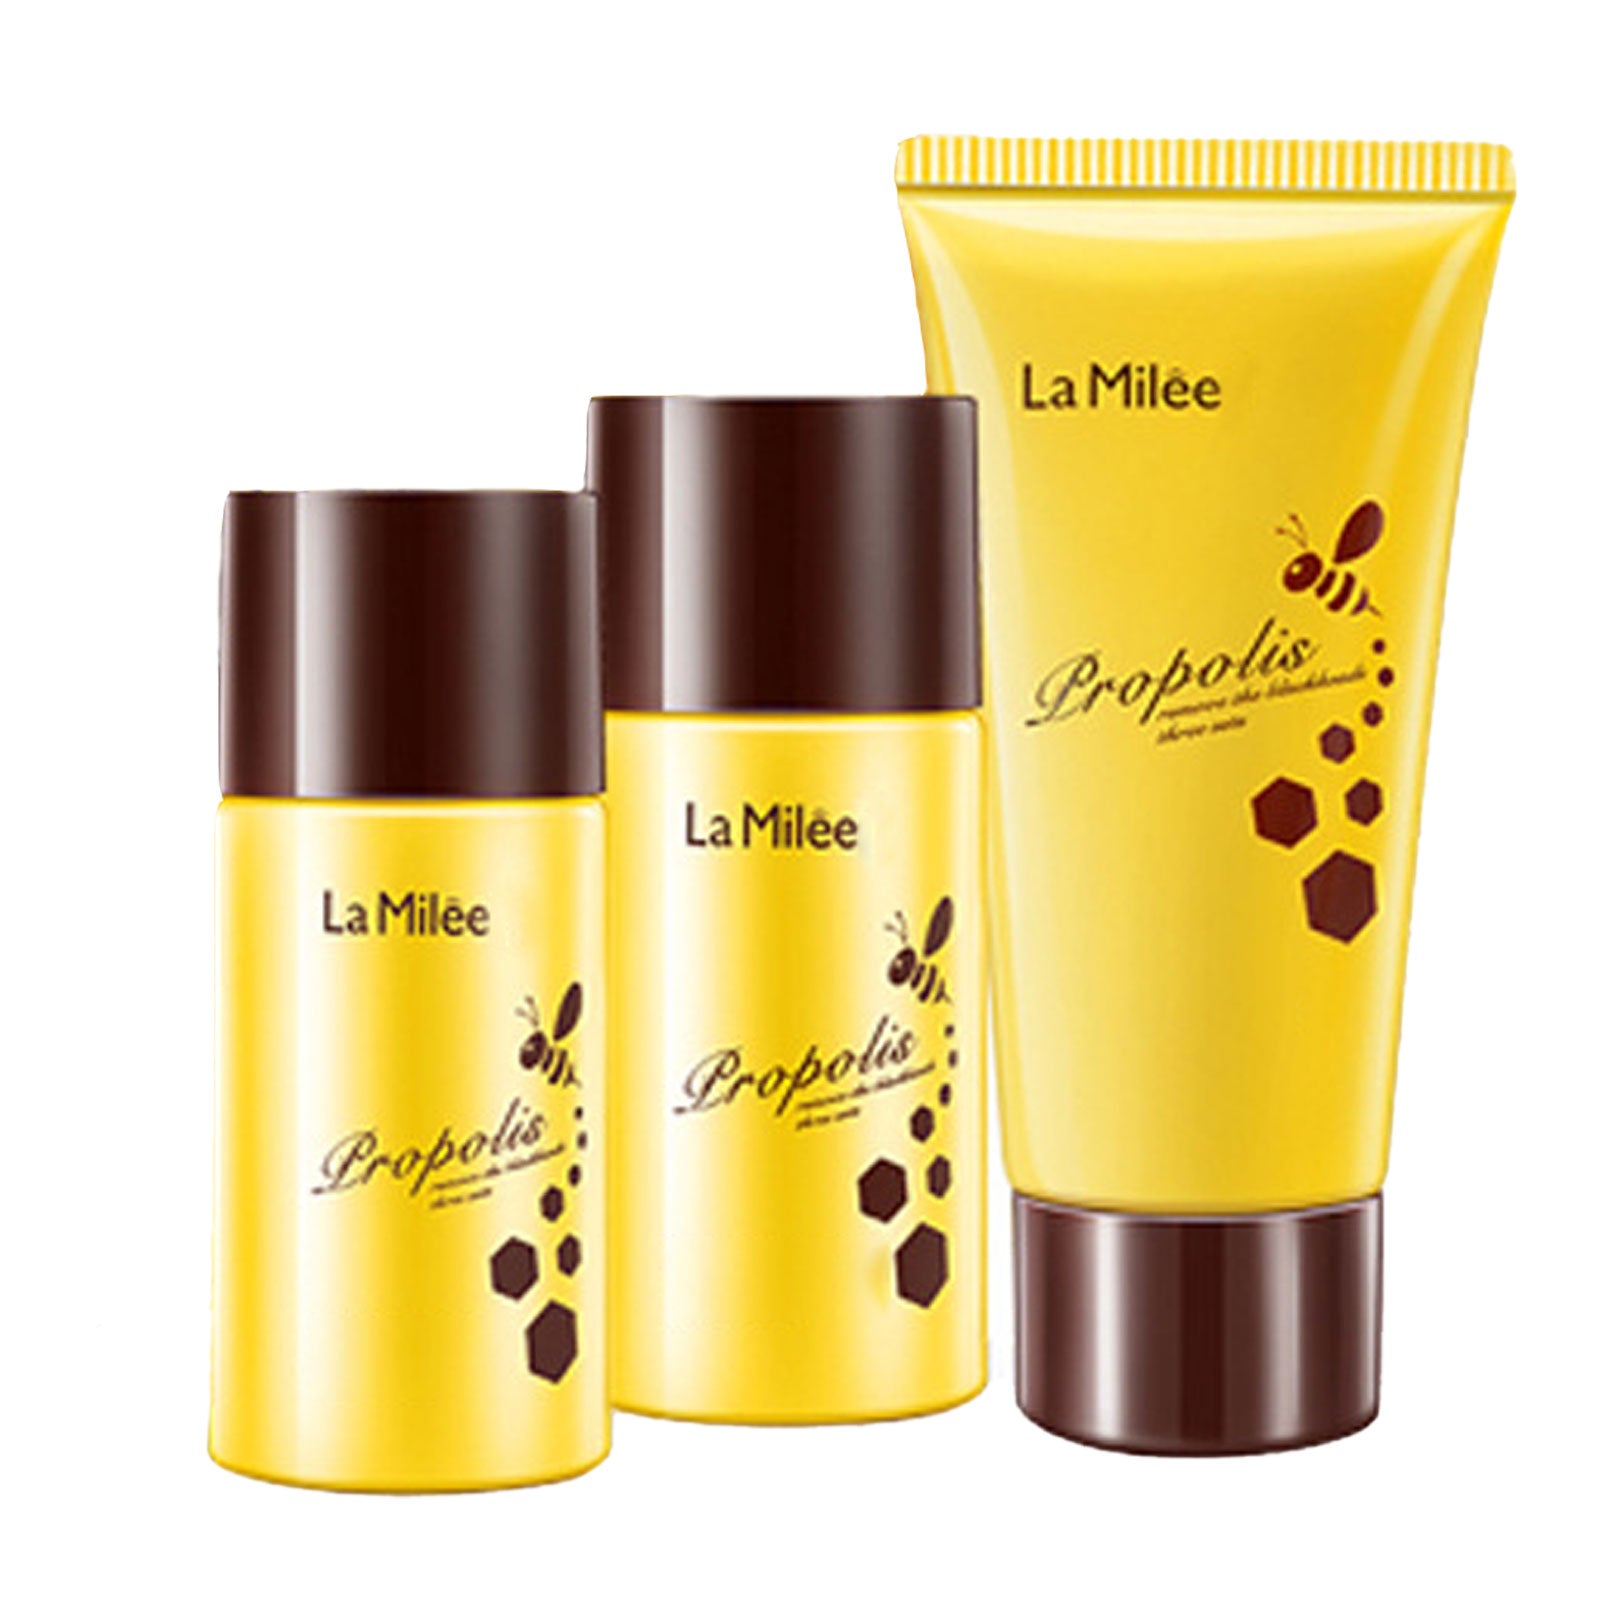 chicstyle La Milee Propolis Blackhead Remover Serum Shrink Pore Deep Cleaning Skin Care